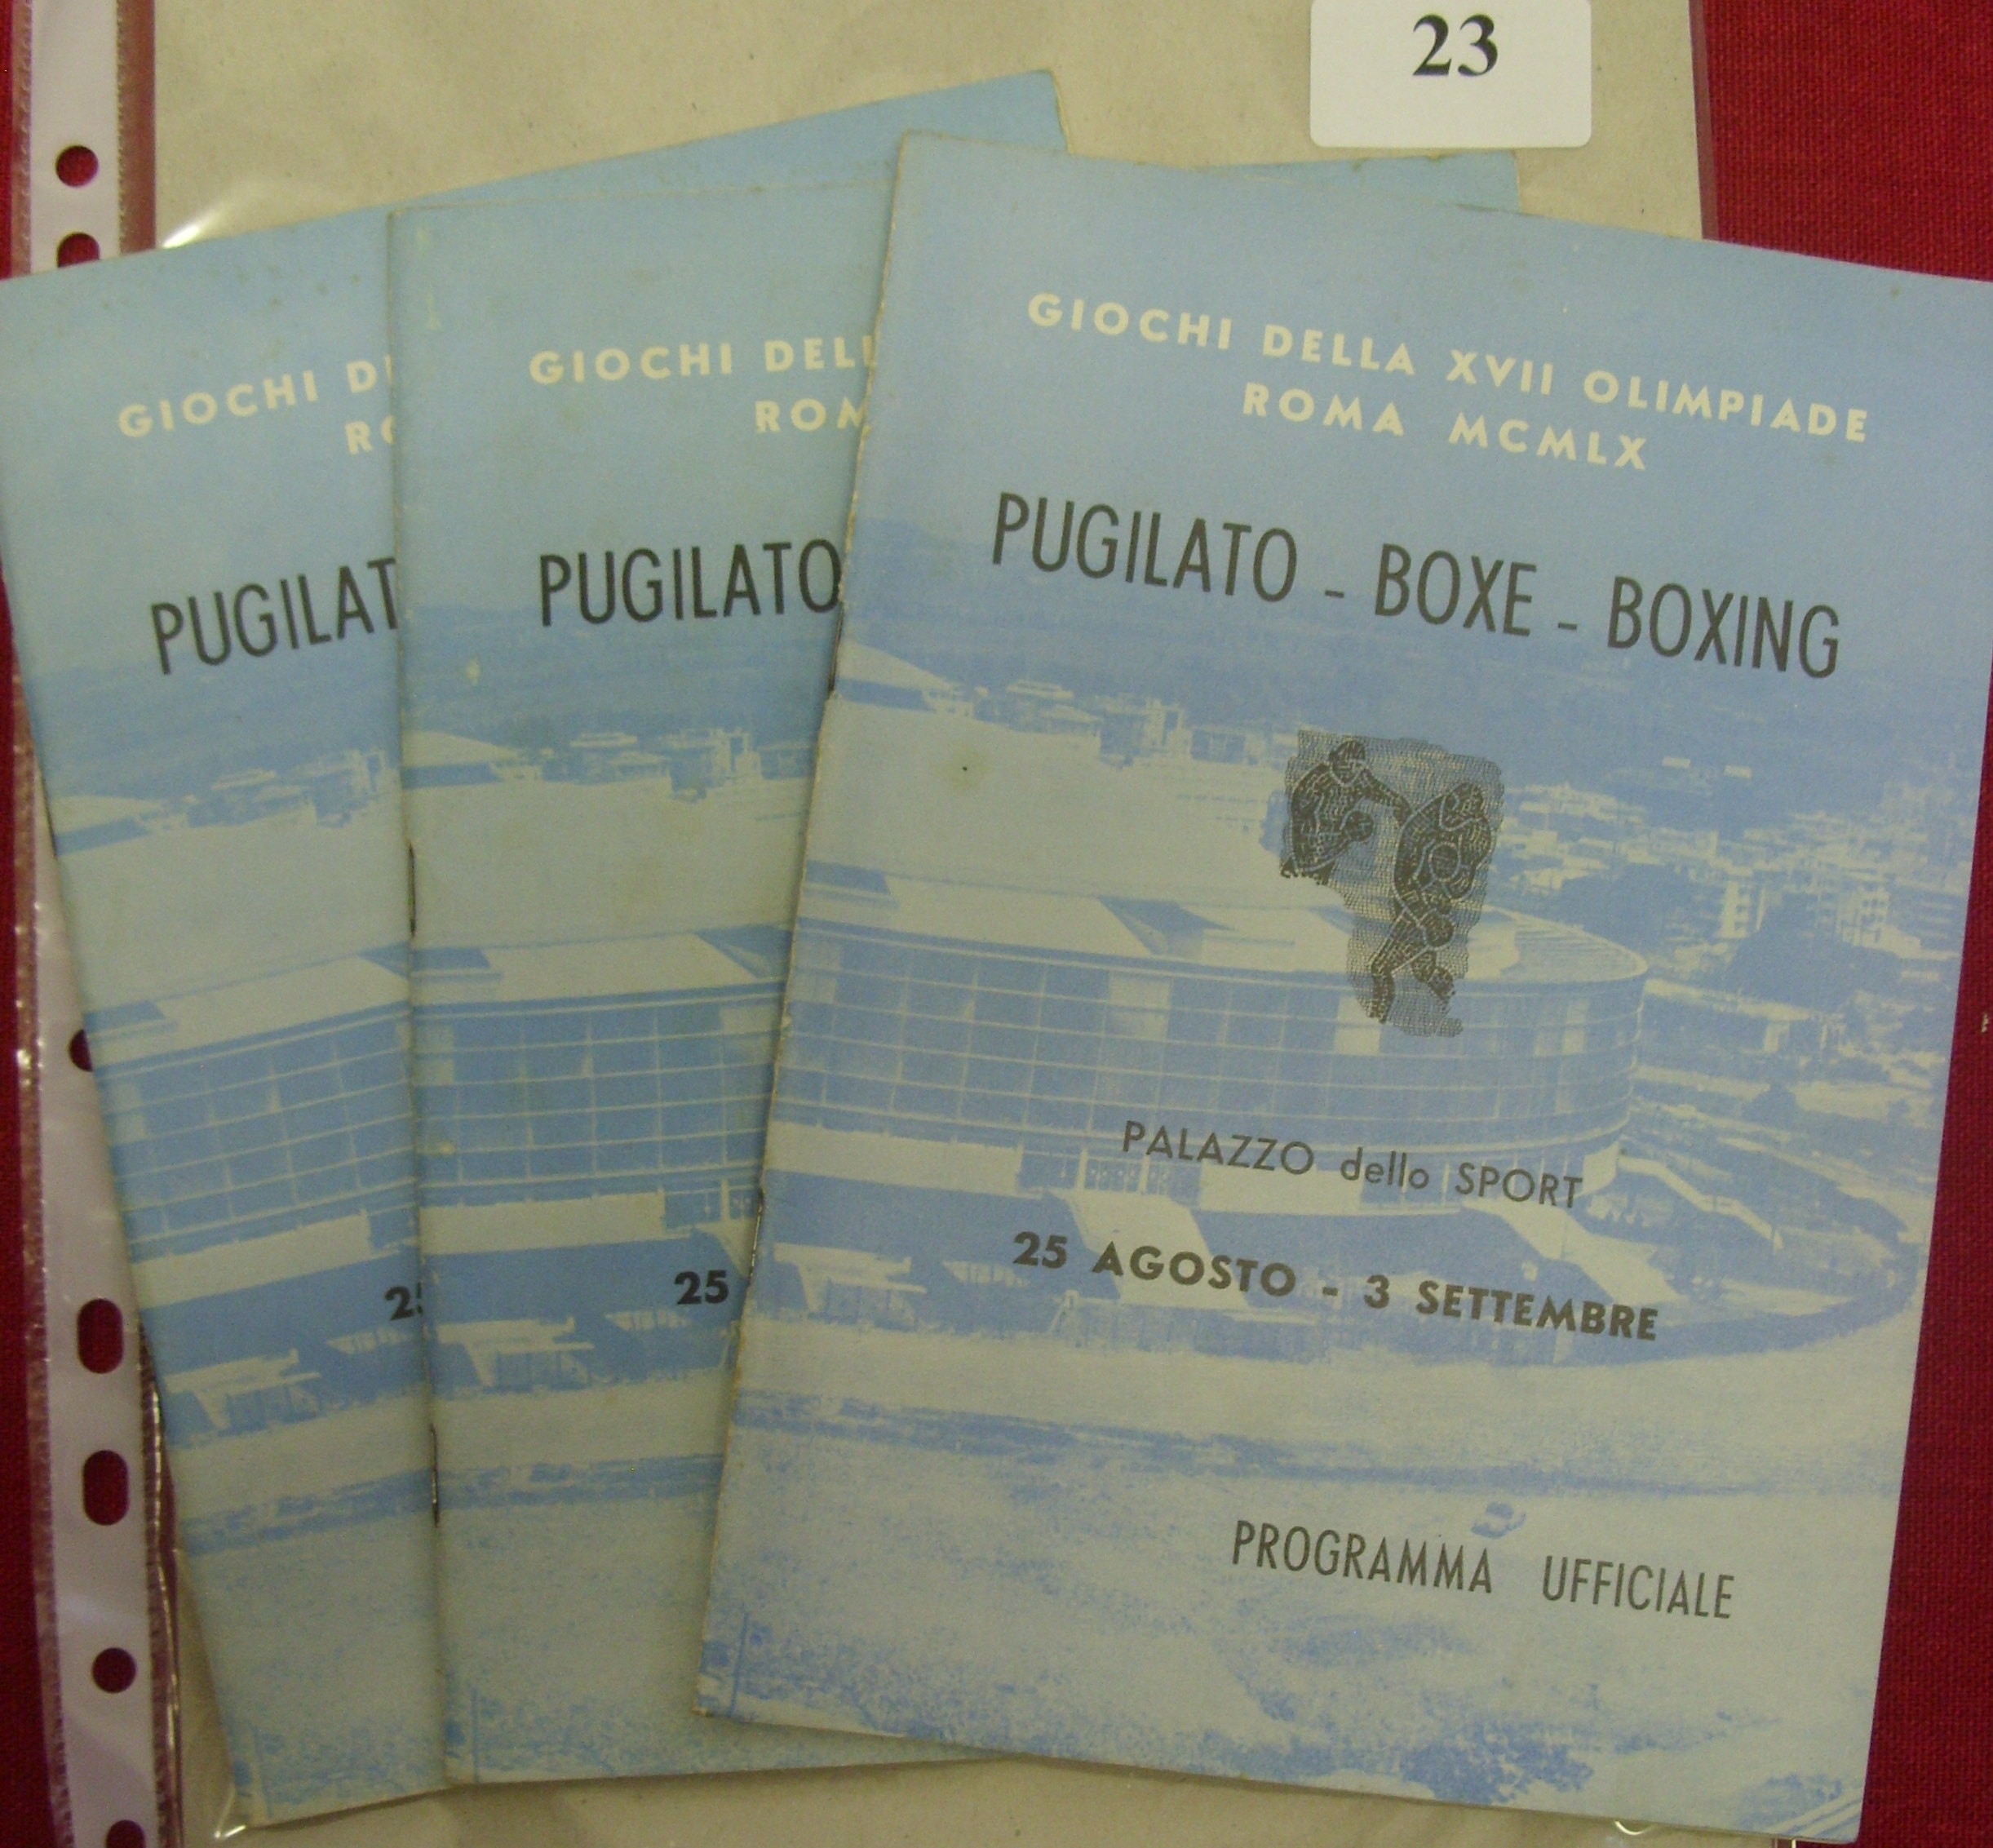 1960 Olympic Games, Boxing, a collection of 3 programmes from the Boxing tournament from 25th August